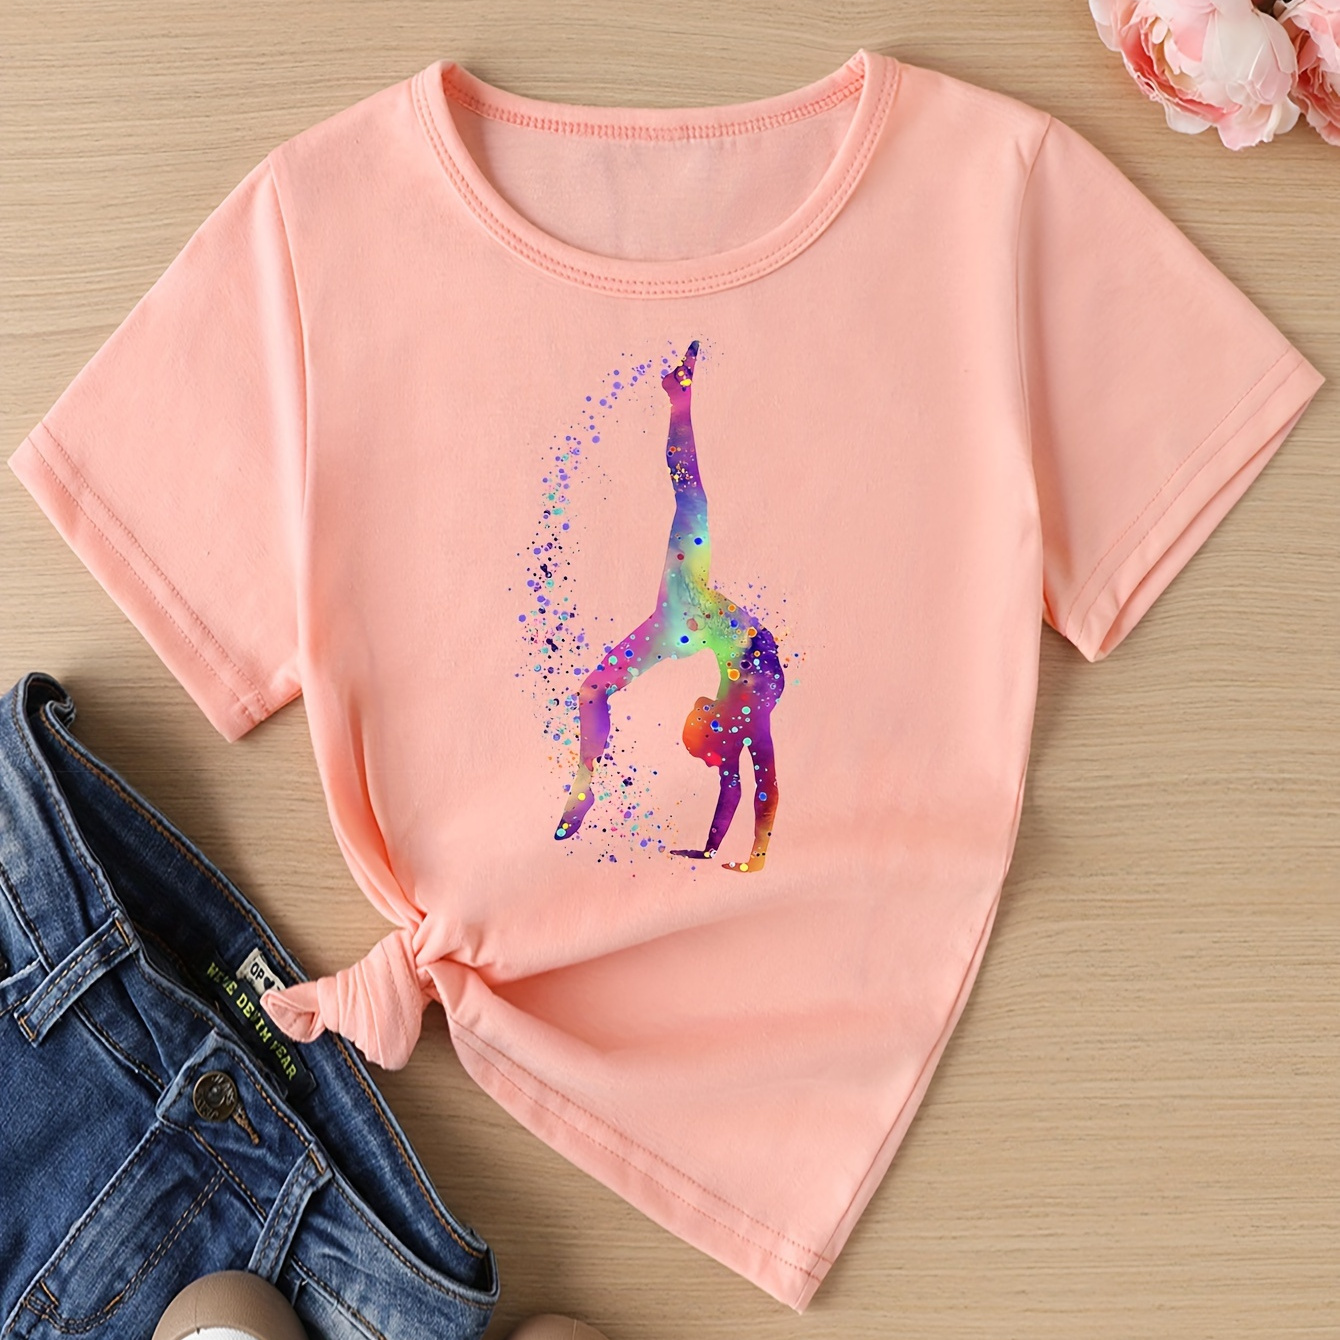 

Gymnastics Print, Girls Graphic Short Sleeve T-shirt, Casual Comfy Loose Tees For Summer